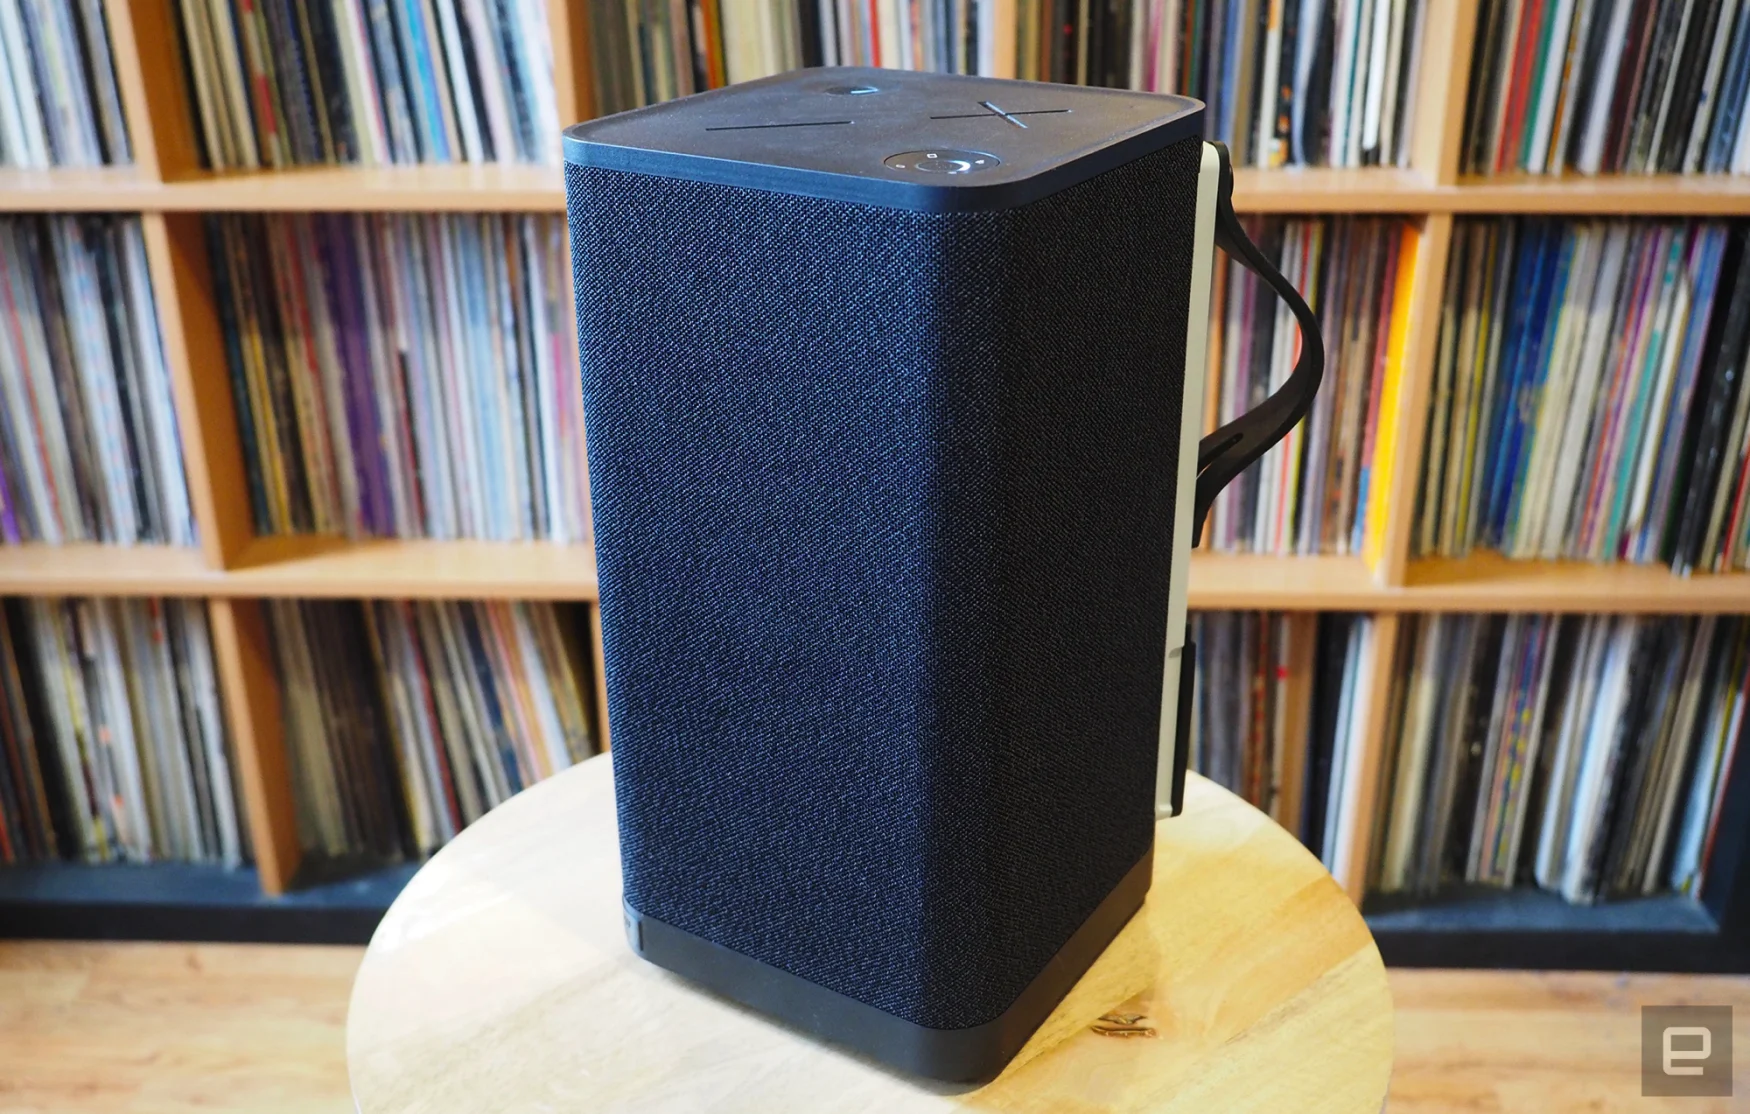 The UE Hyperboom photographed for Engadget's 2022 portable Bluetooth speaker guide in front of a shelf full of records.